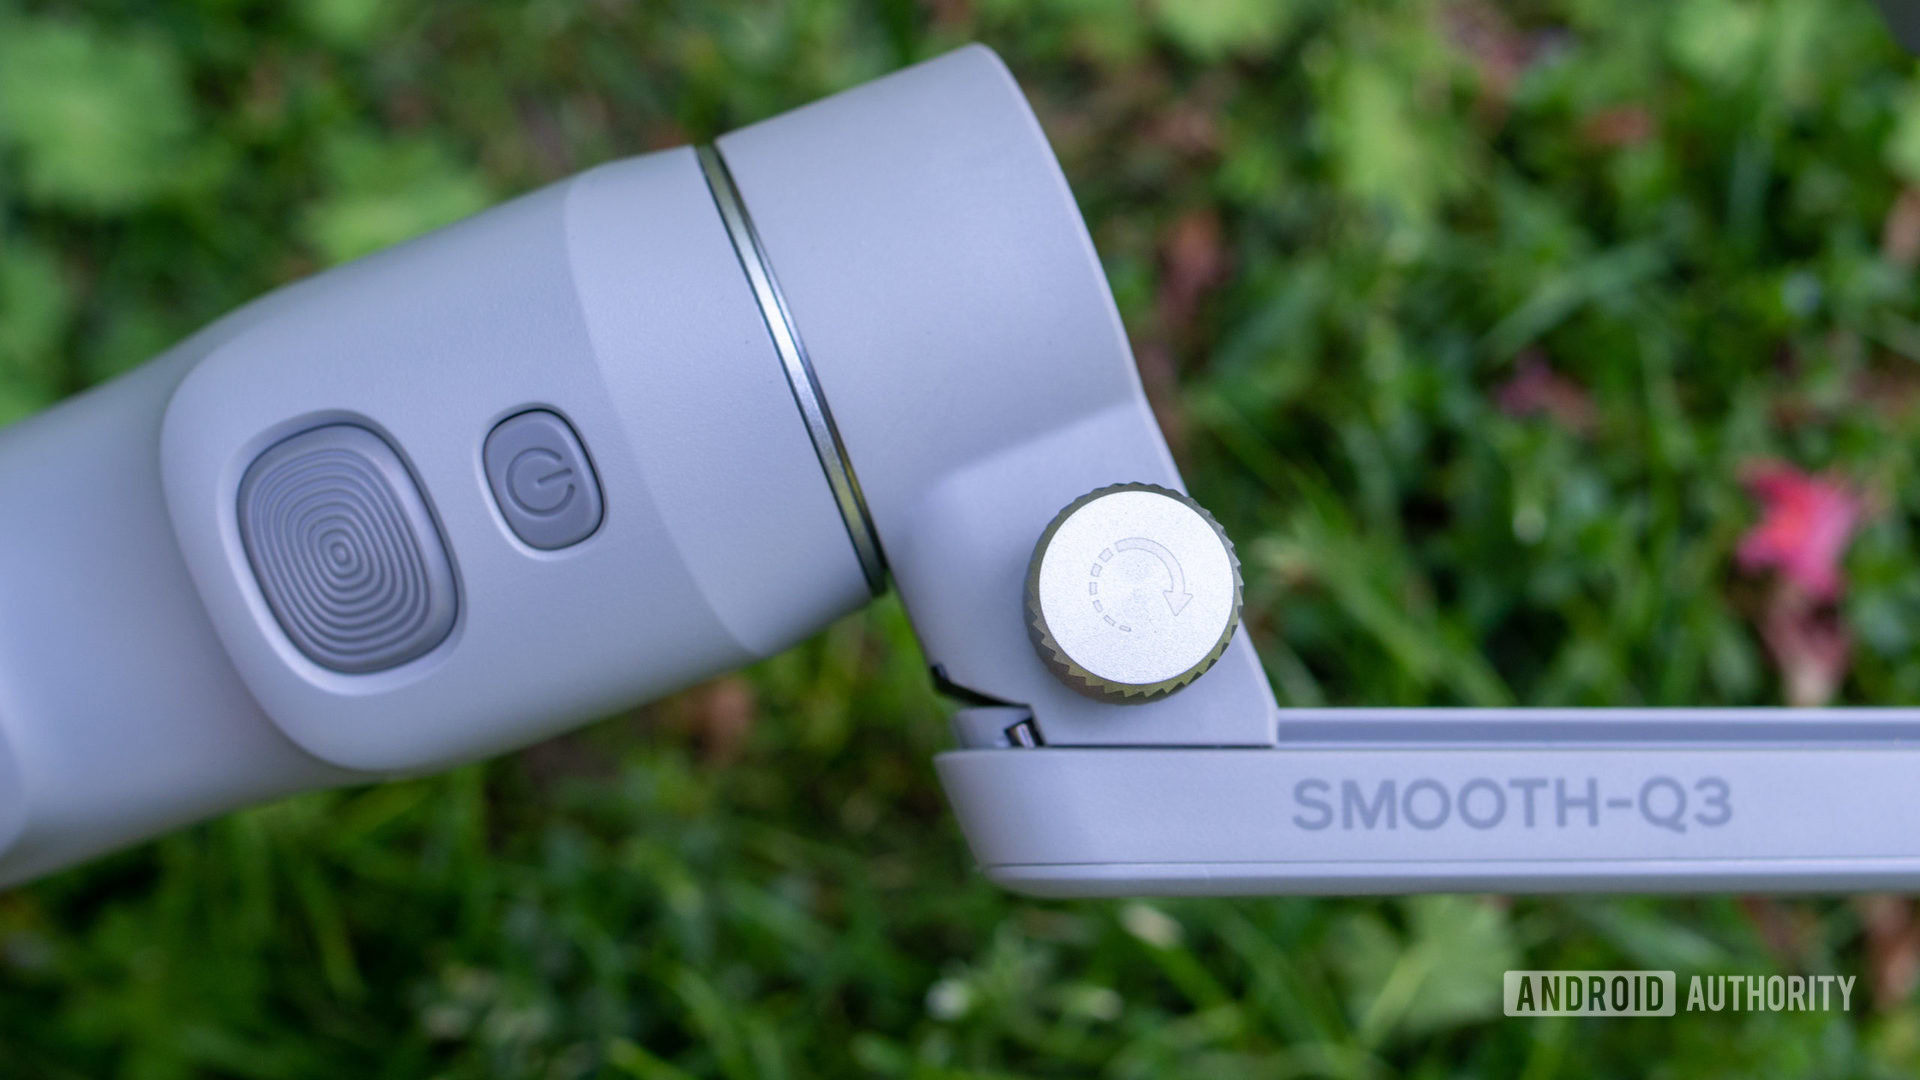 The Zhiyun Smooth-Q3 locking screw and buttons.